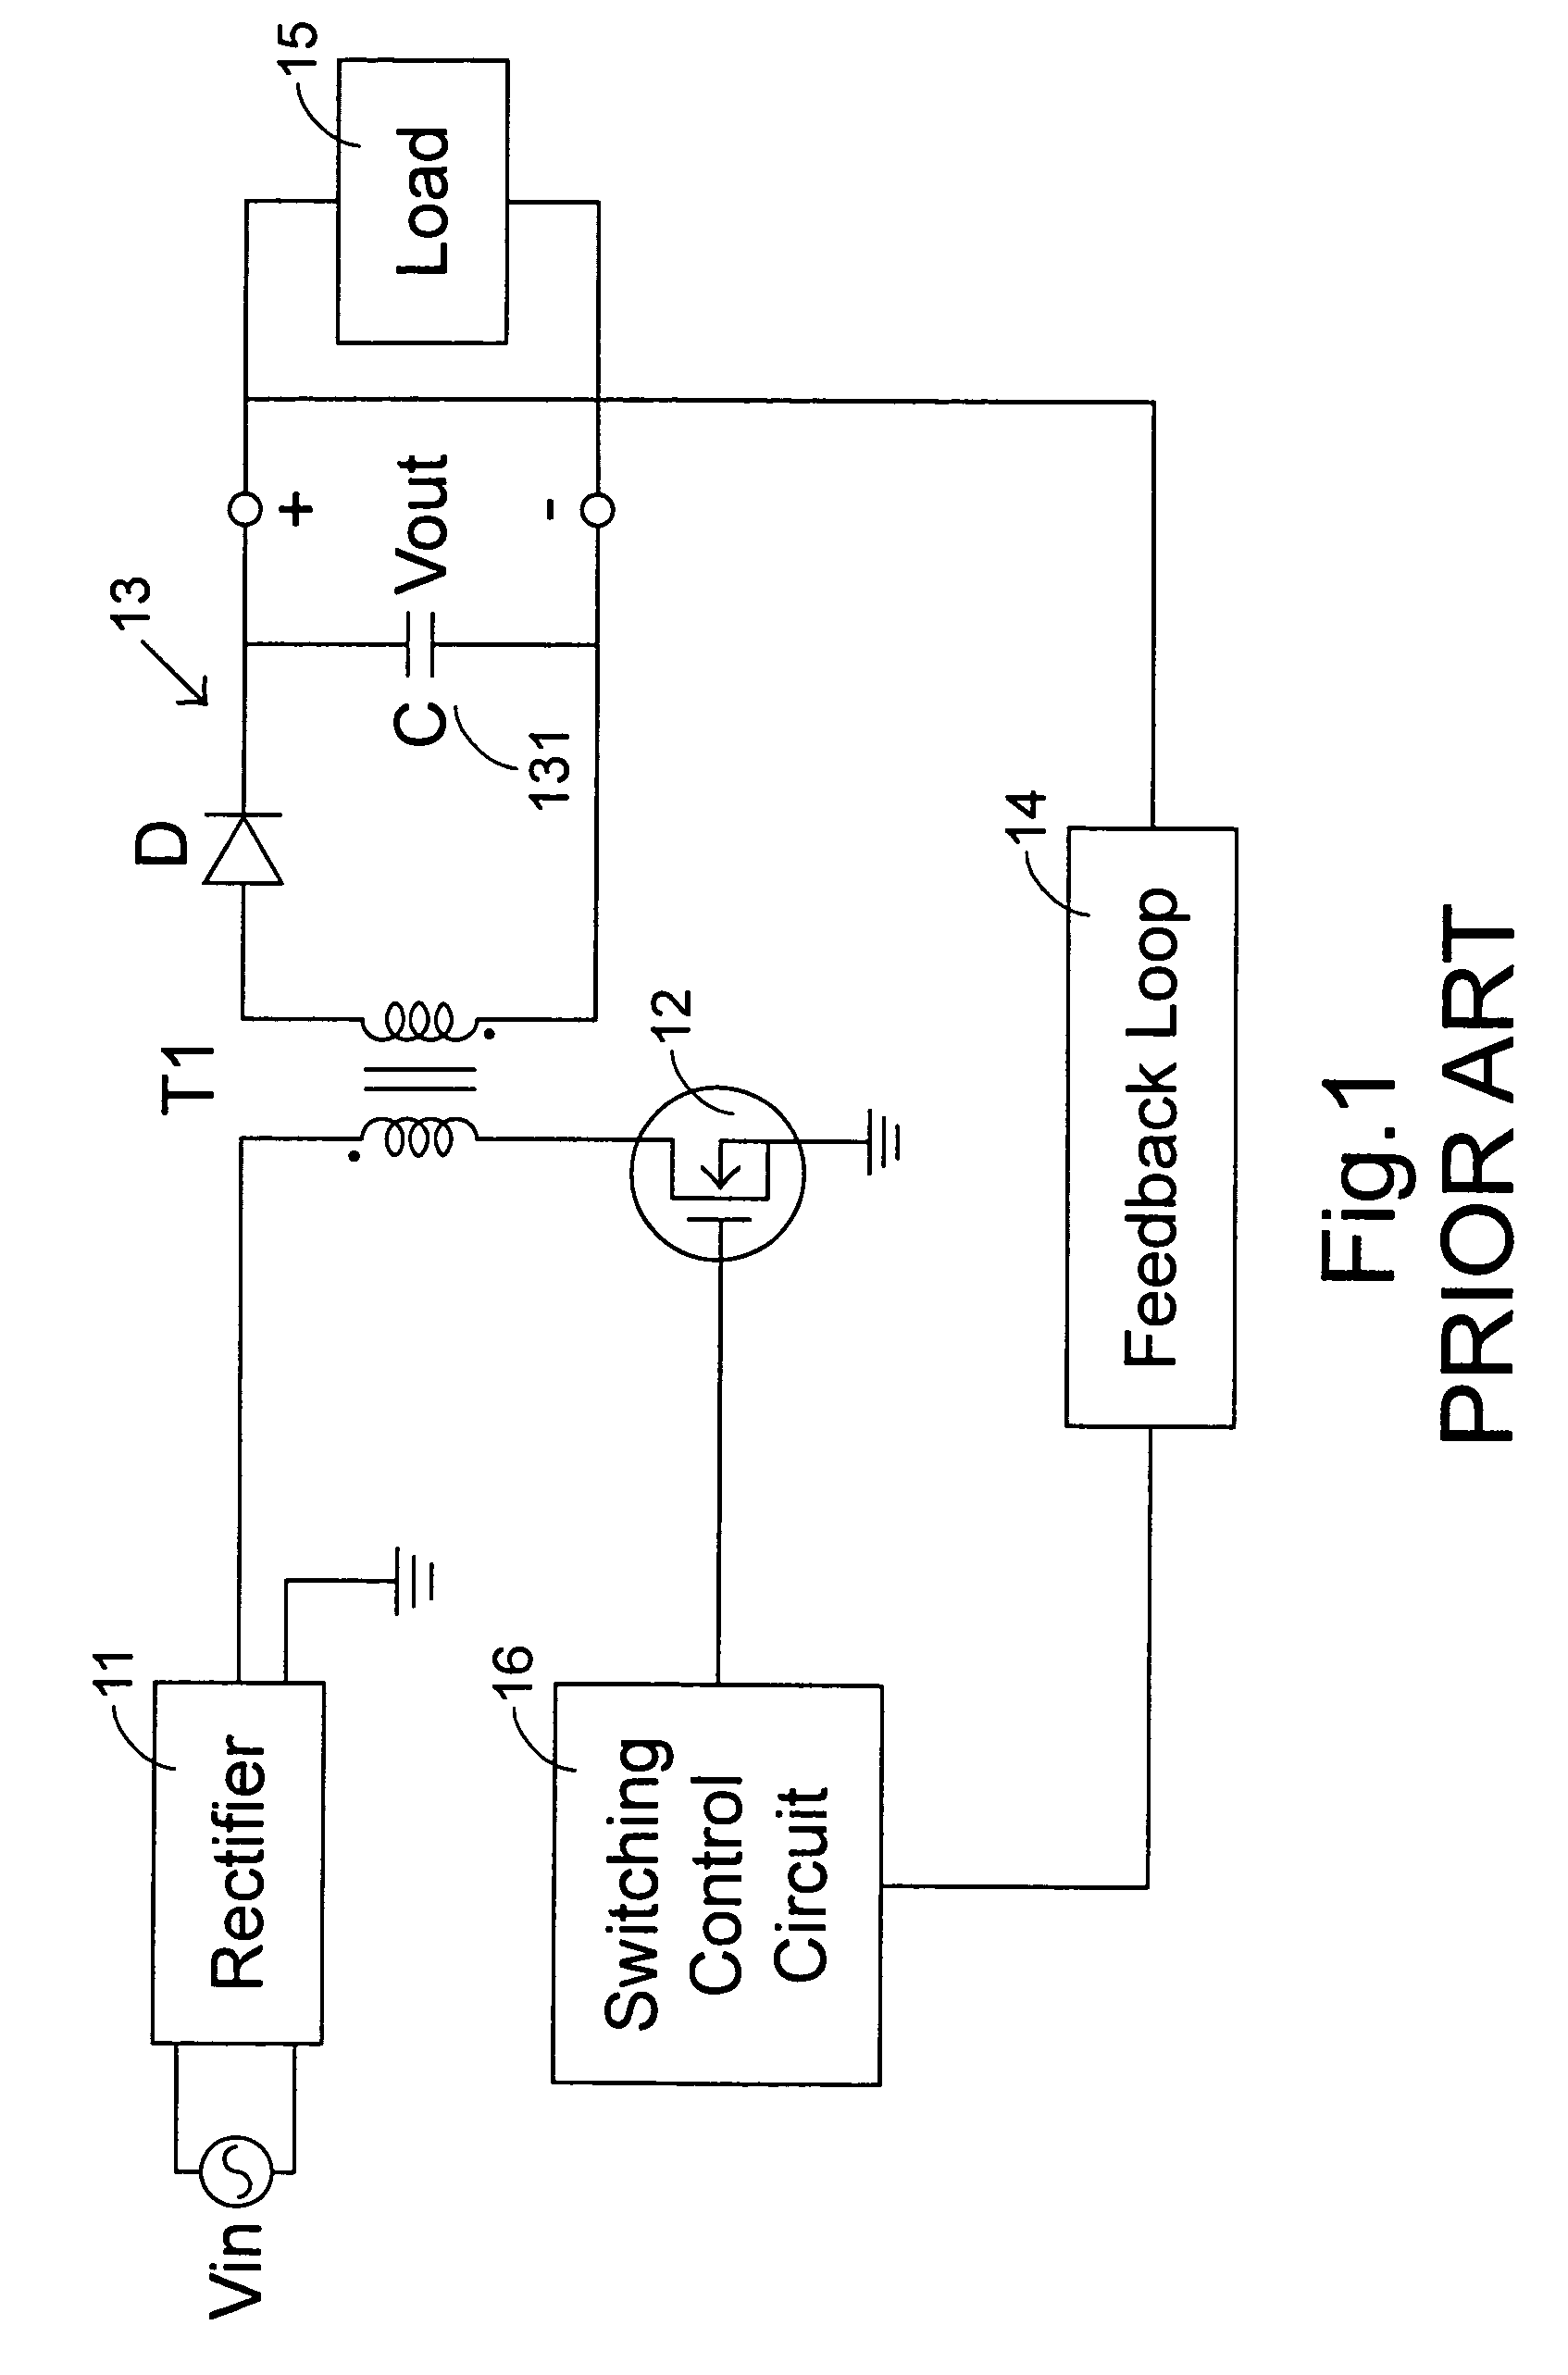 Switching power supply utilizing oscillator frequency tuner for load driving capability under peak load condition